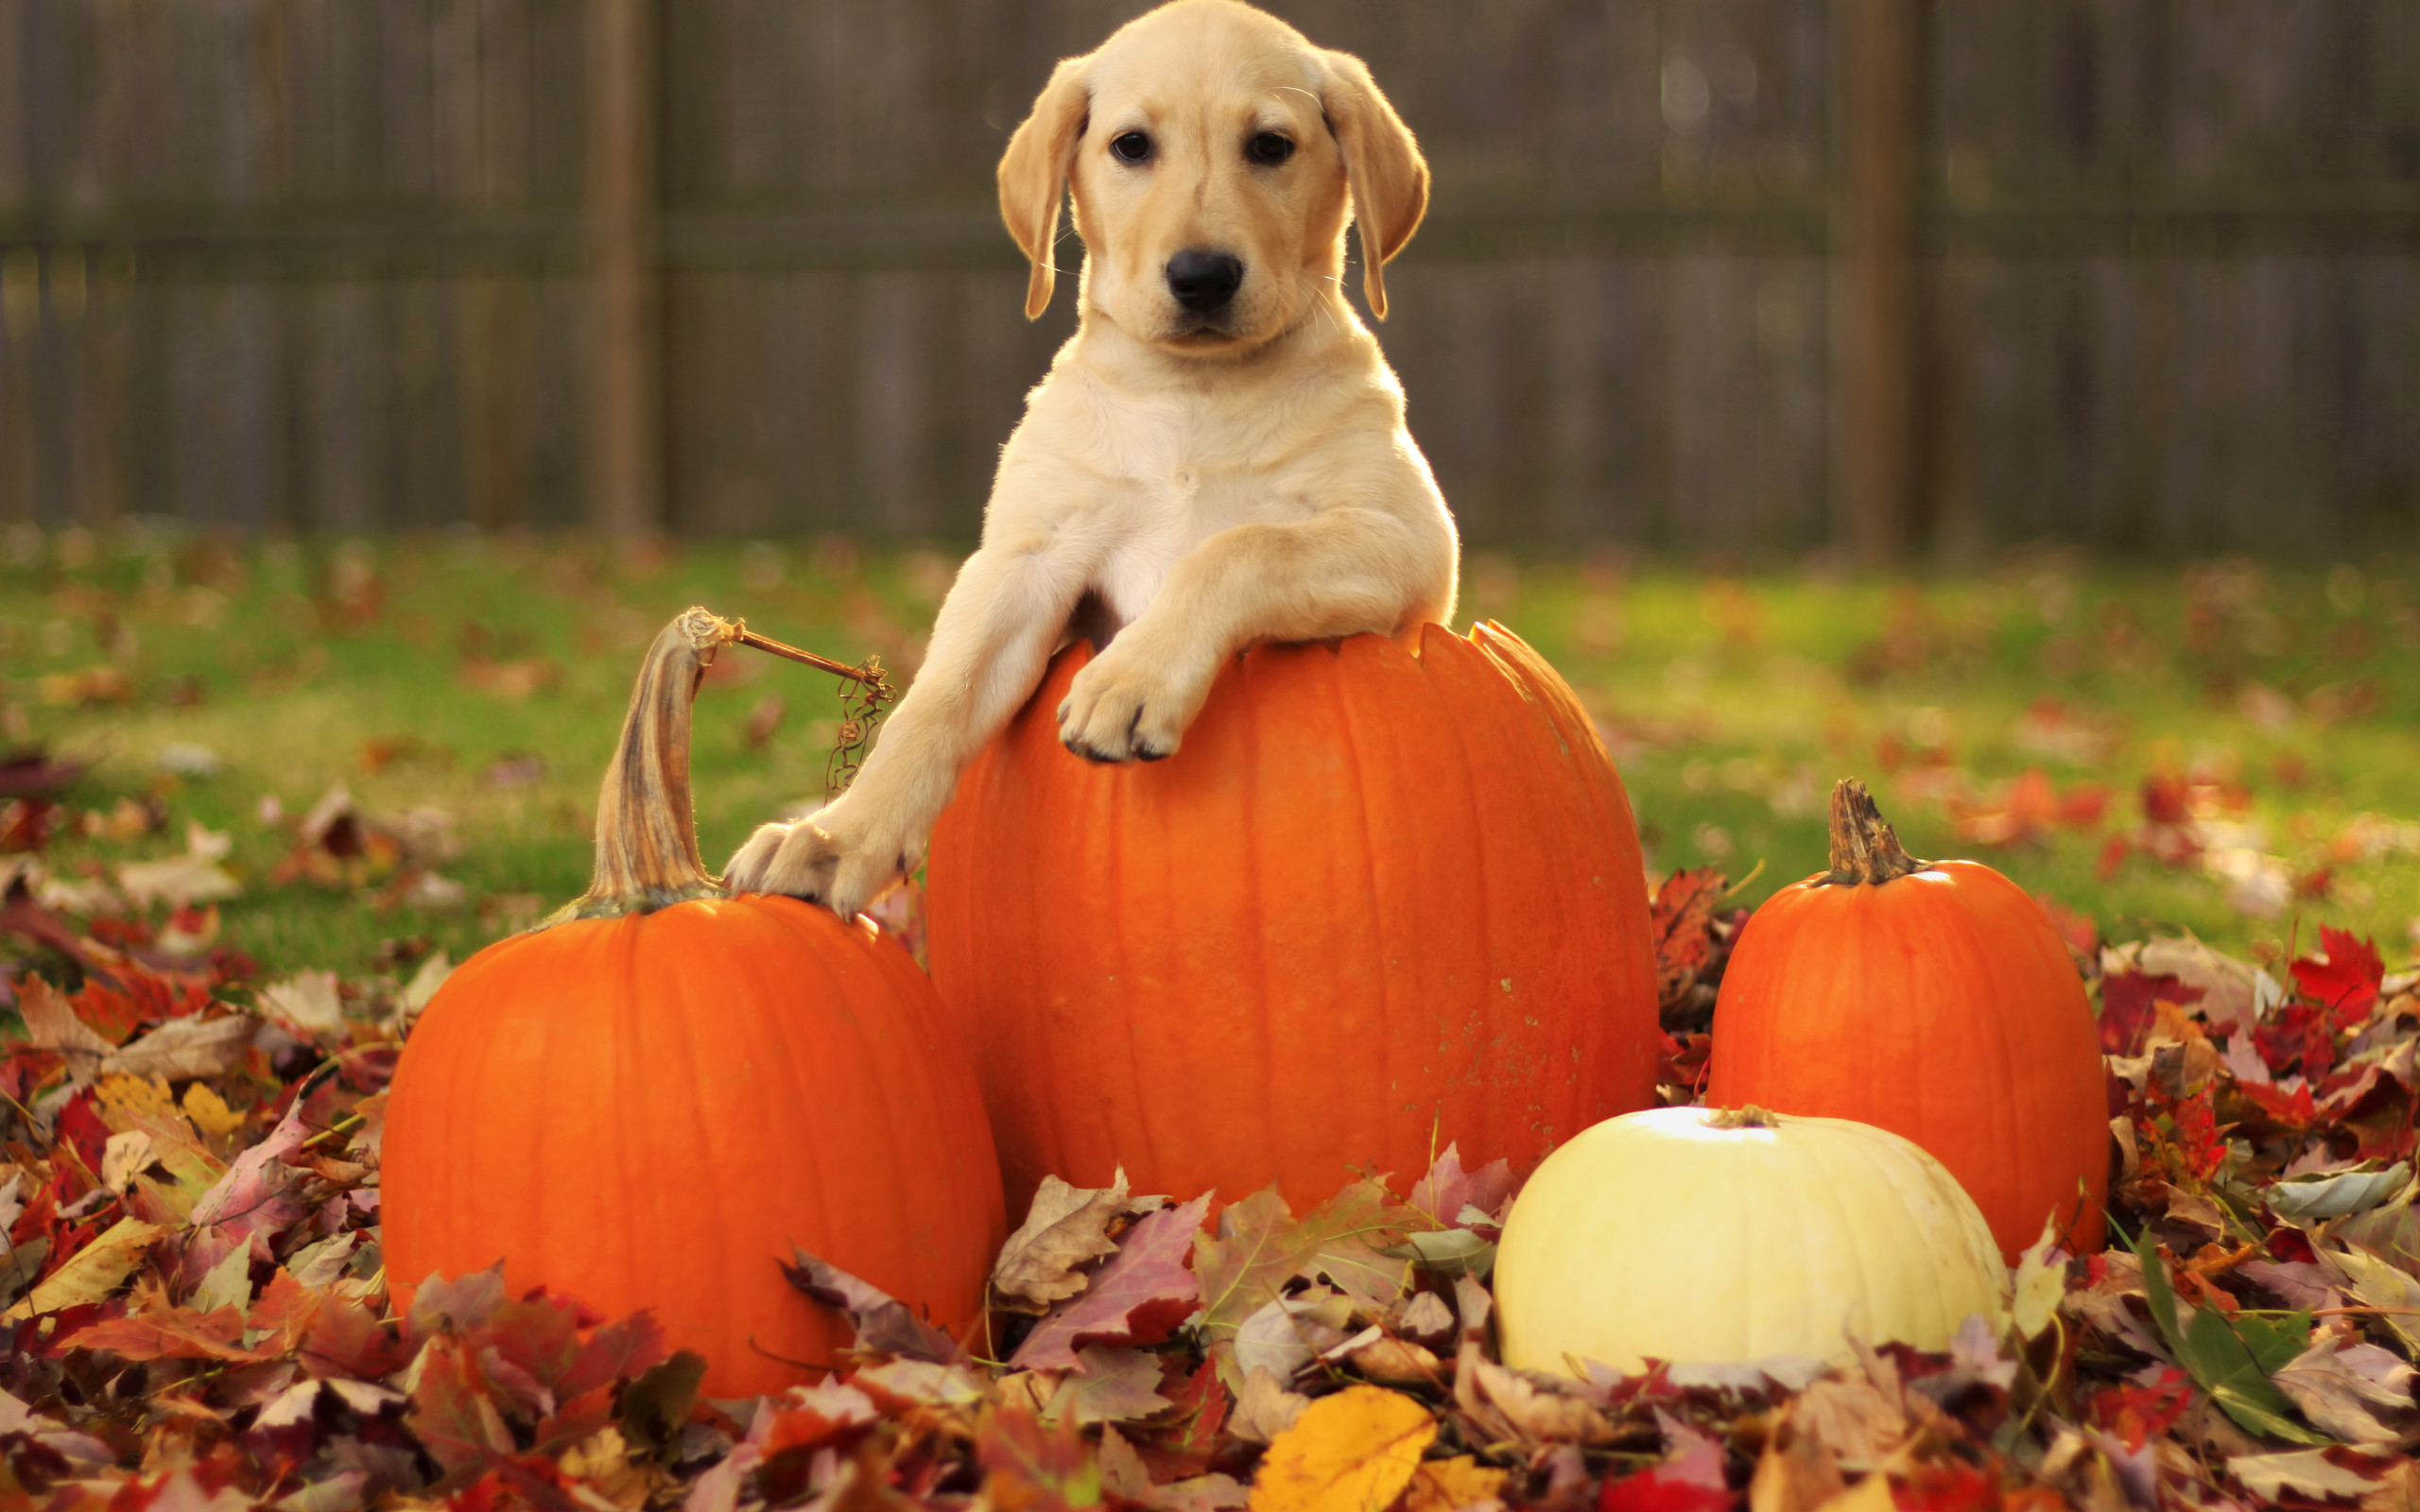 2560x1600 Autumn Free Wallpaper - A pumpkin and a..dog is a great wallpaper for